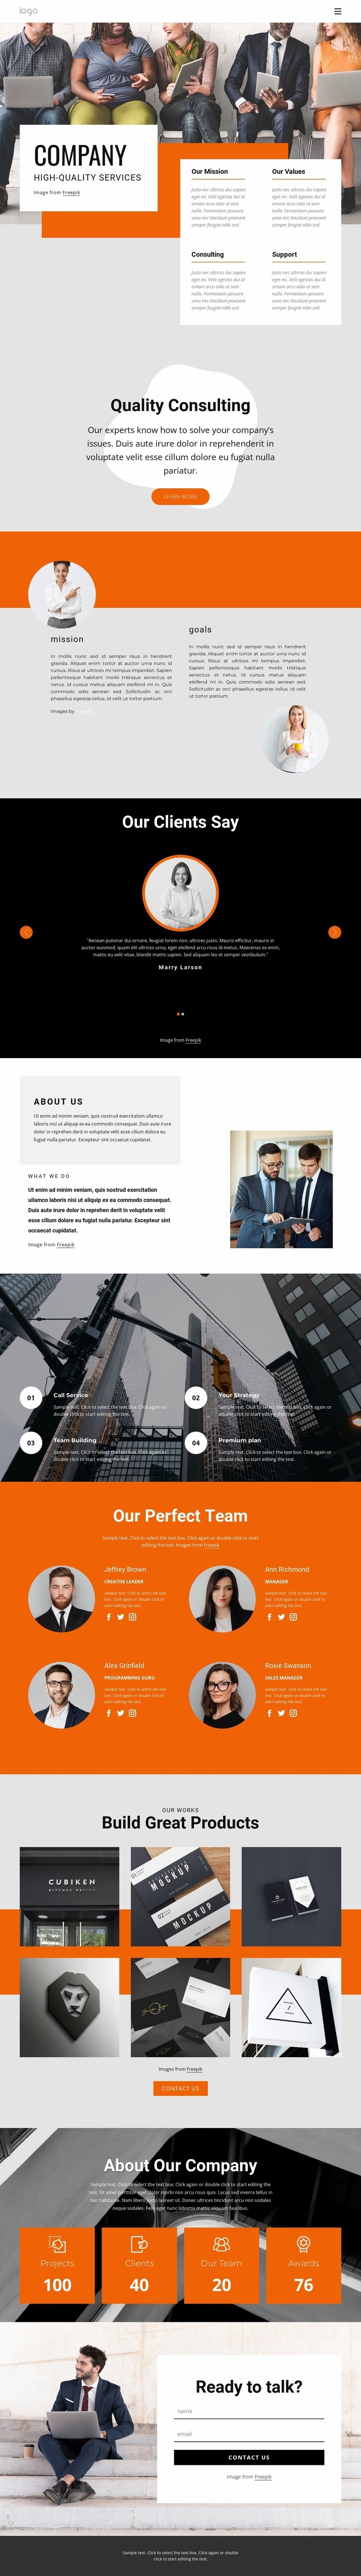 Hight quality consulting firm Homepage Design